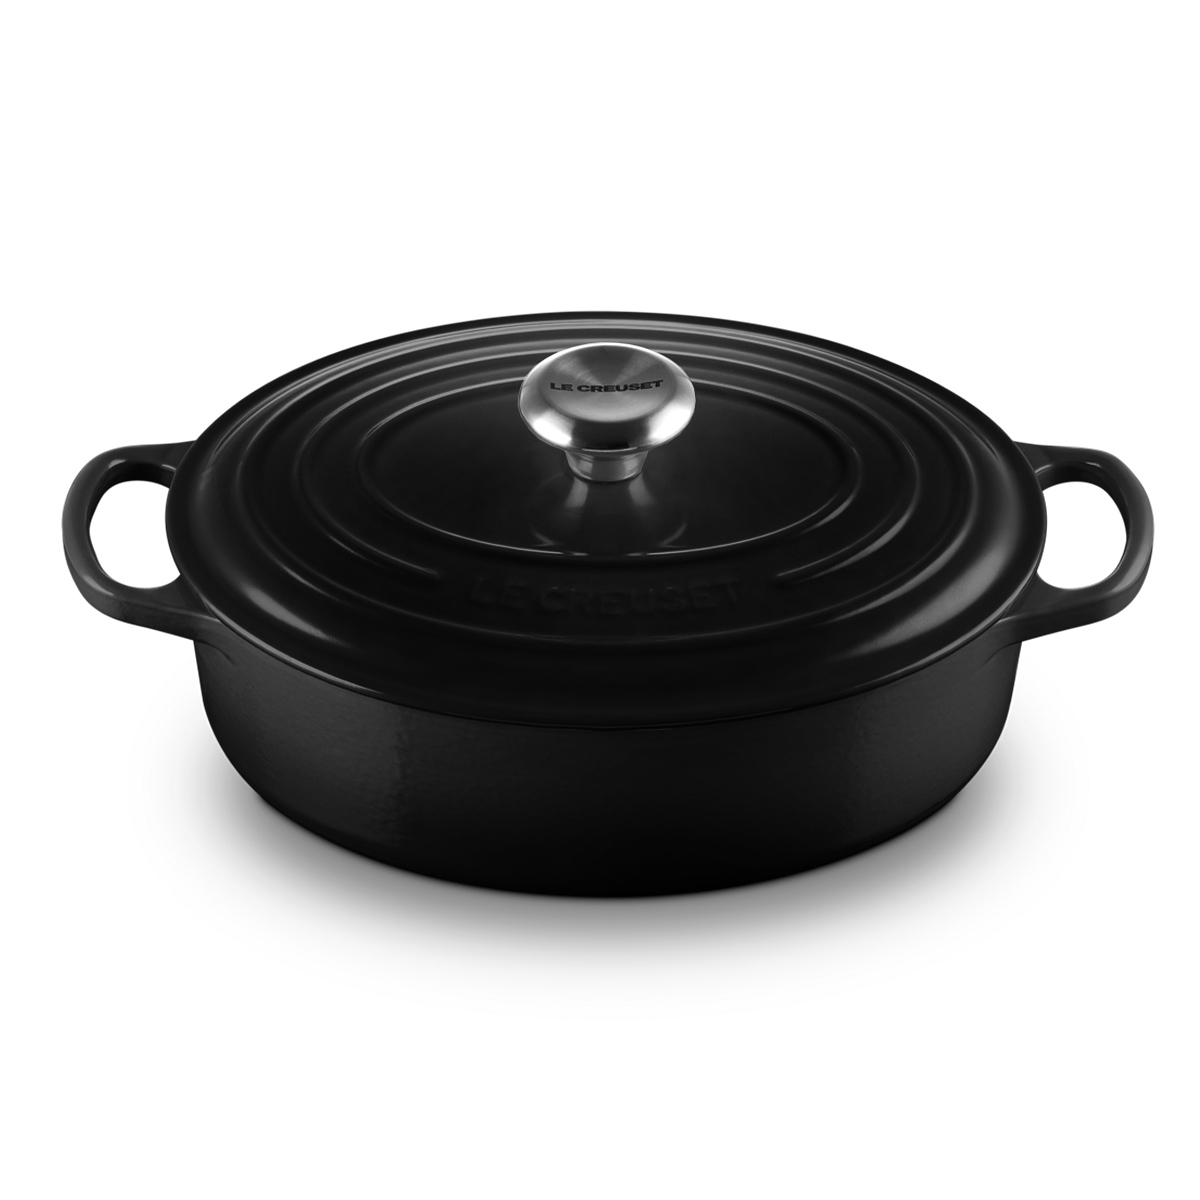 Le Creuset - Signature Oval Wide French Oven 27 cm - Black